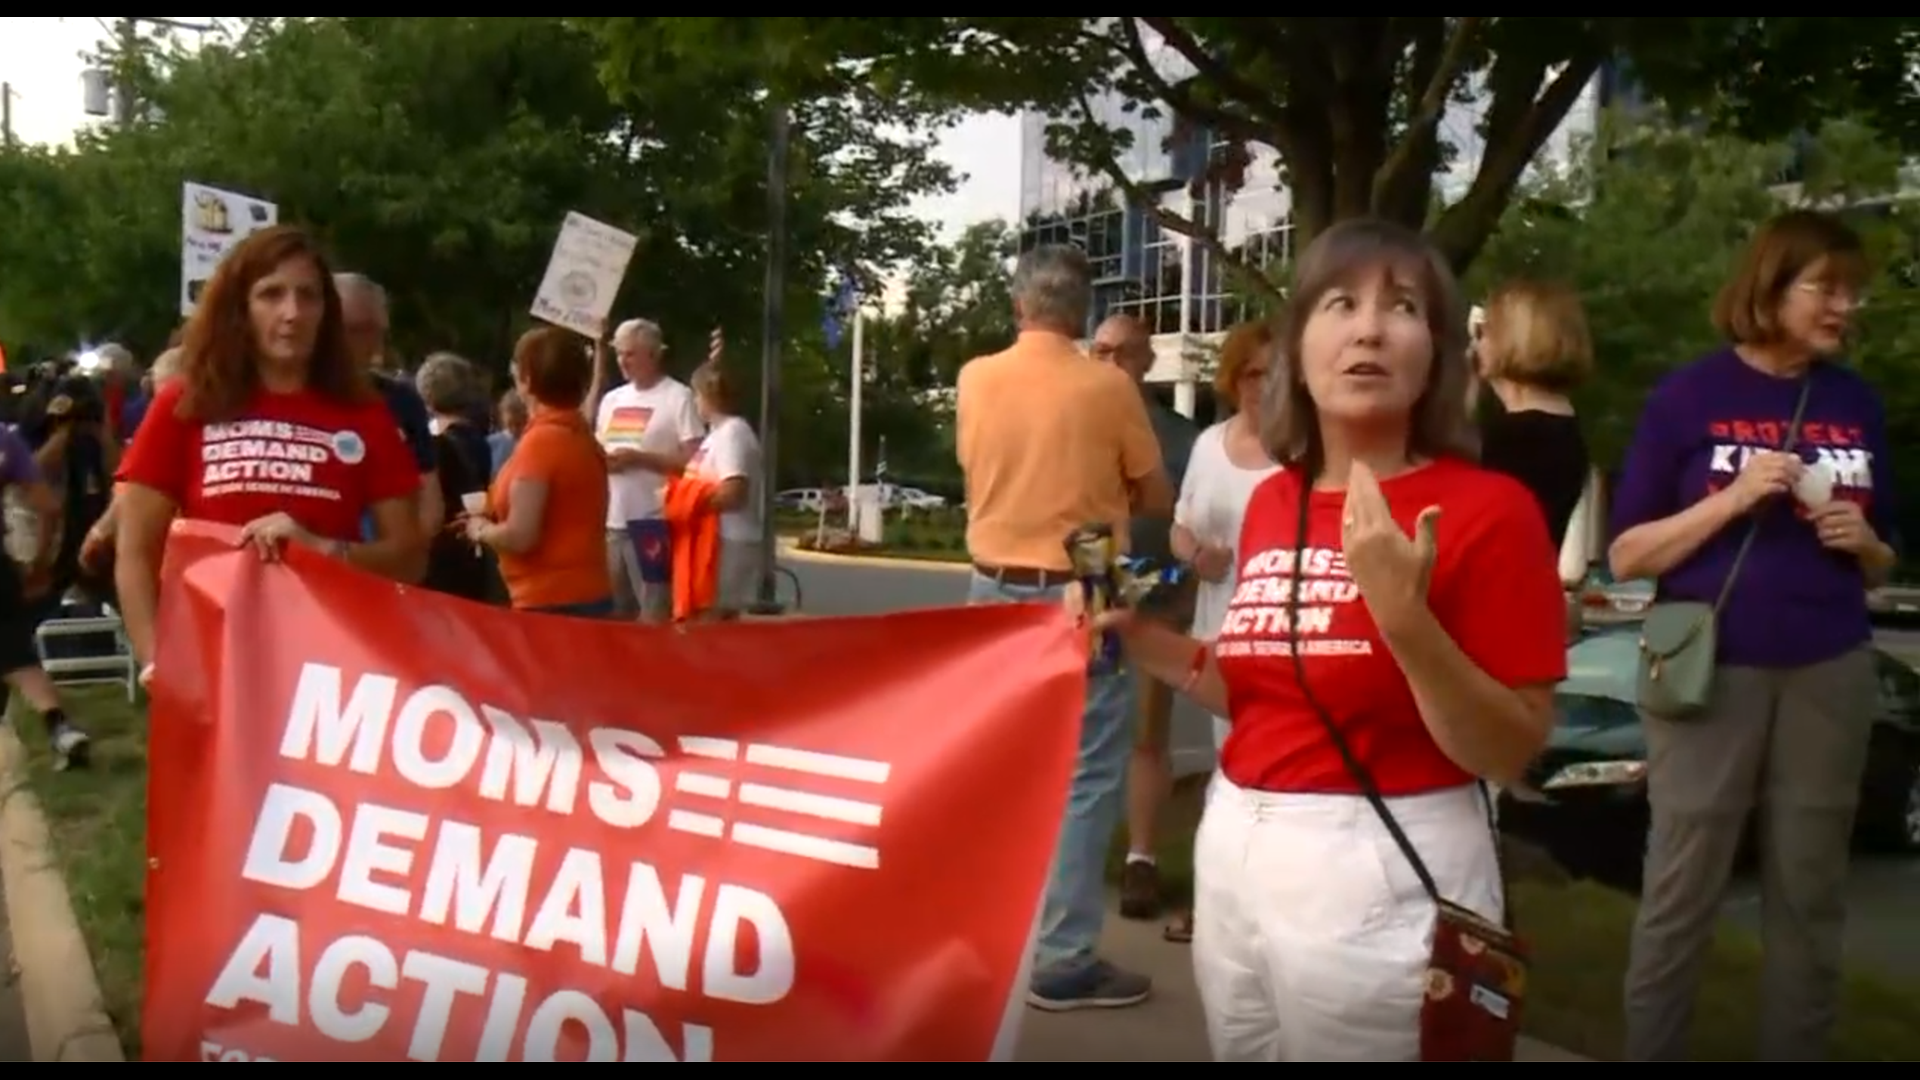 From the Navy Memorial to the White House and Gallery Place, today the group "Moms Demand Action for Gun Sense in America" set up all around downtown D.C. to discuss gun control.